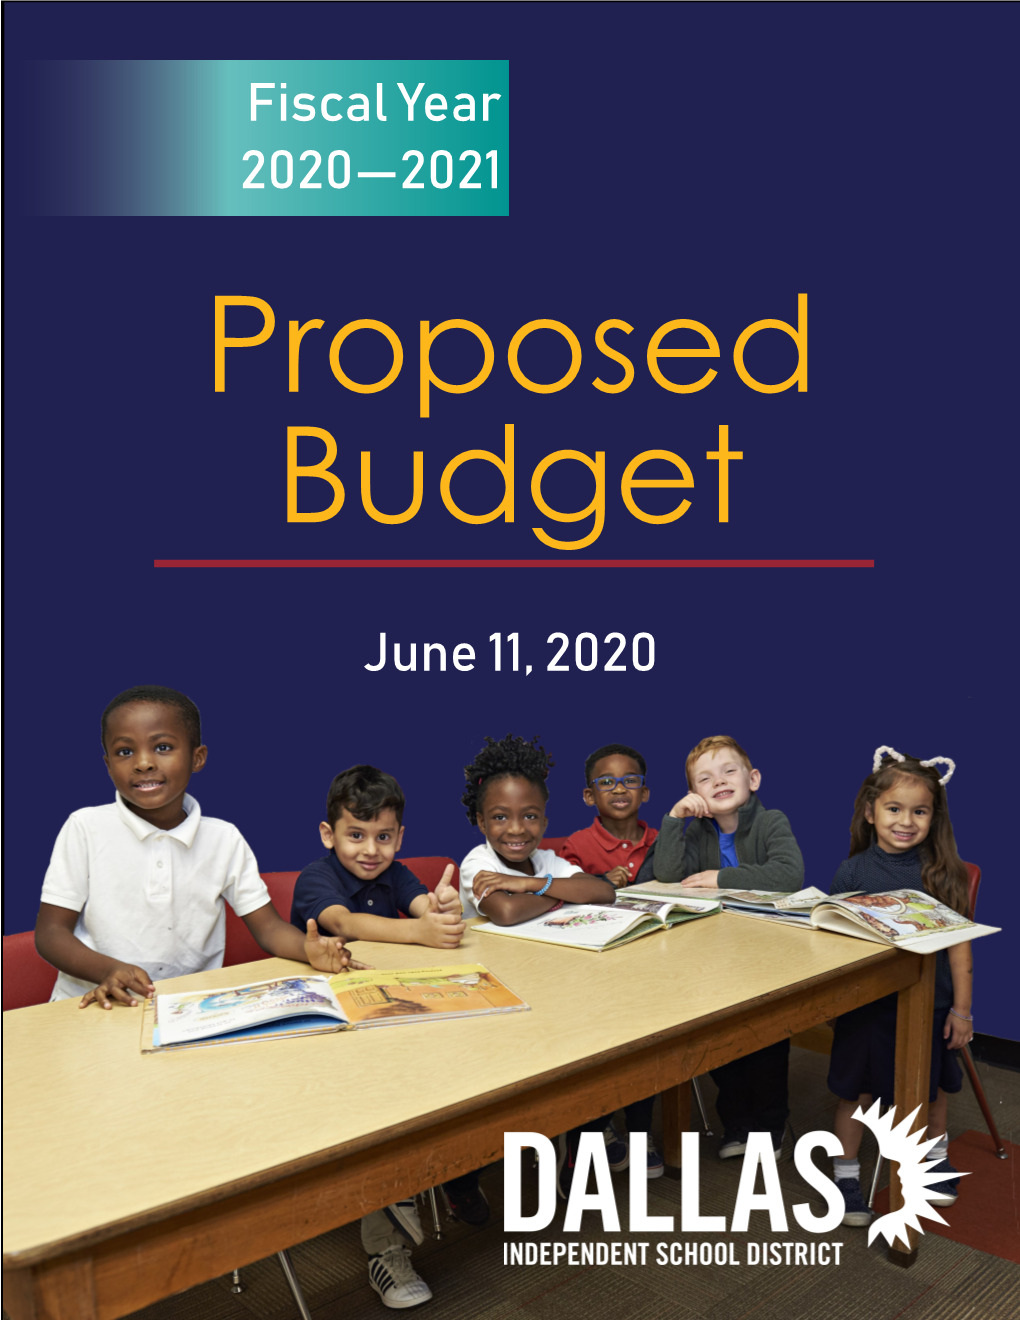 Fiscal Year 2020—2021 June 11, 2020